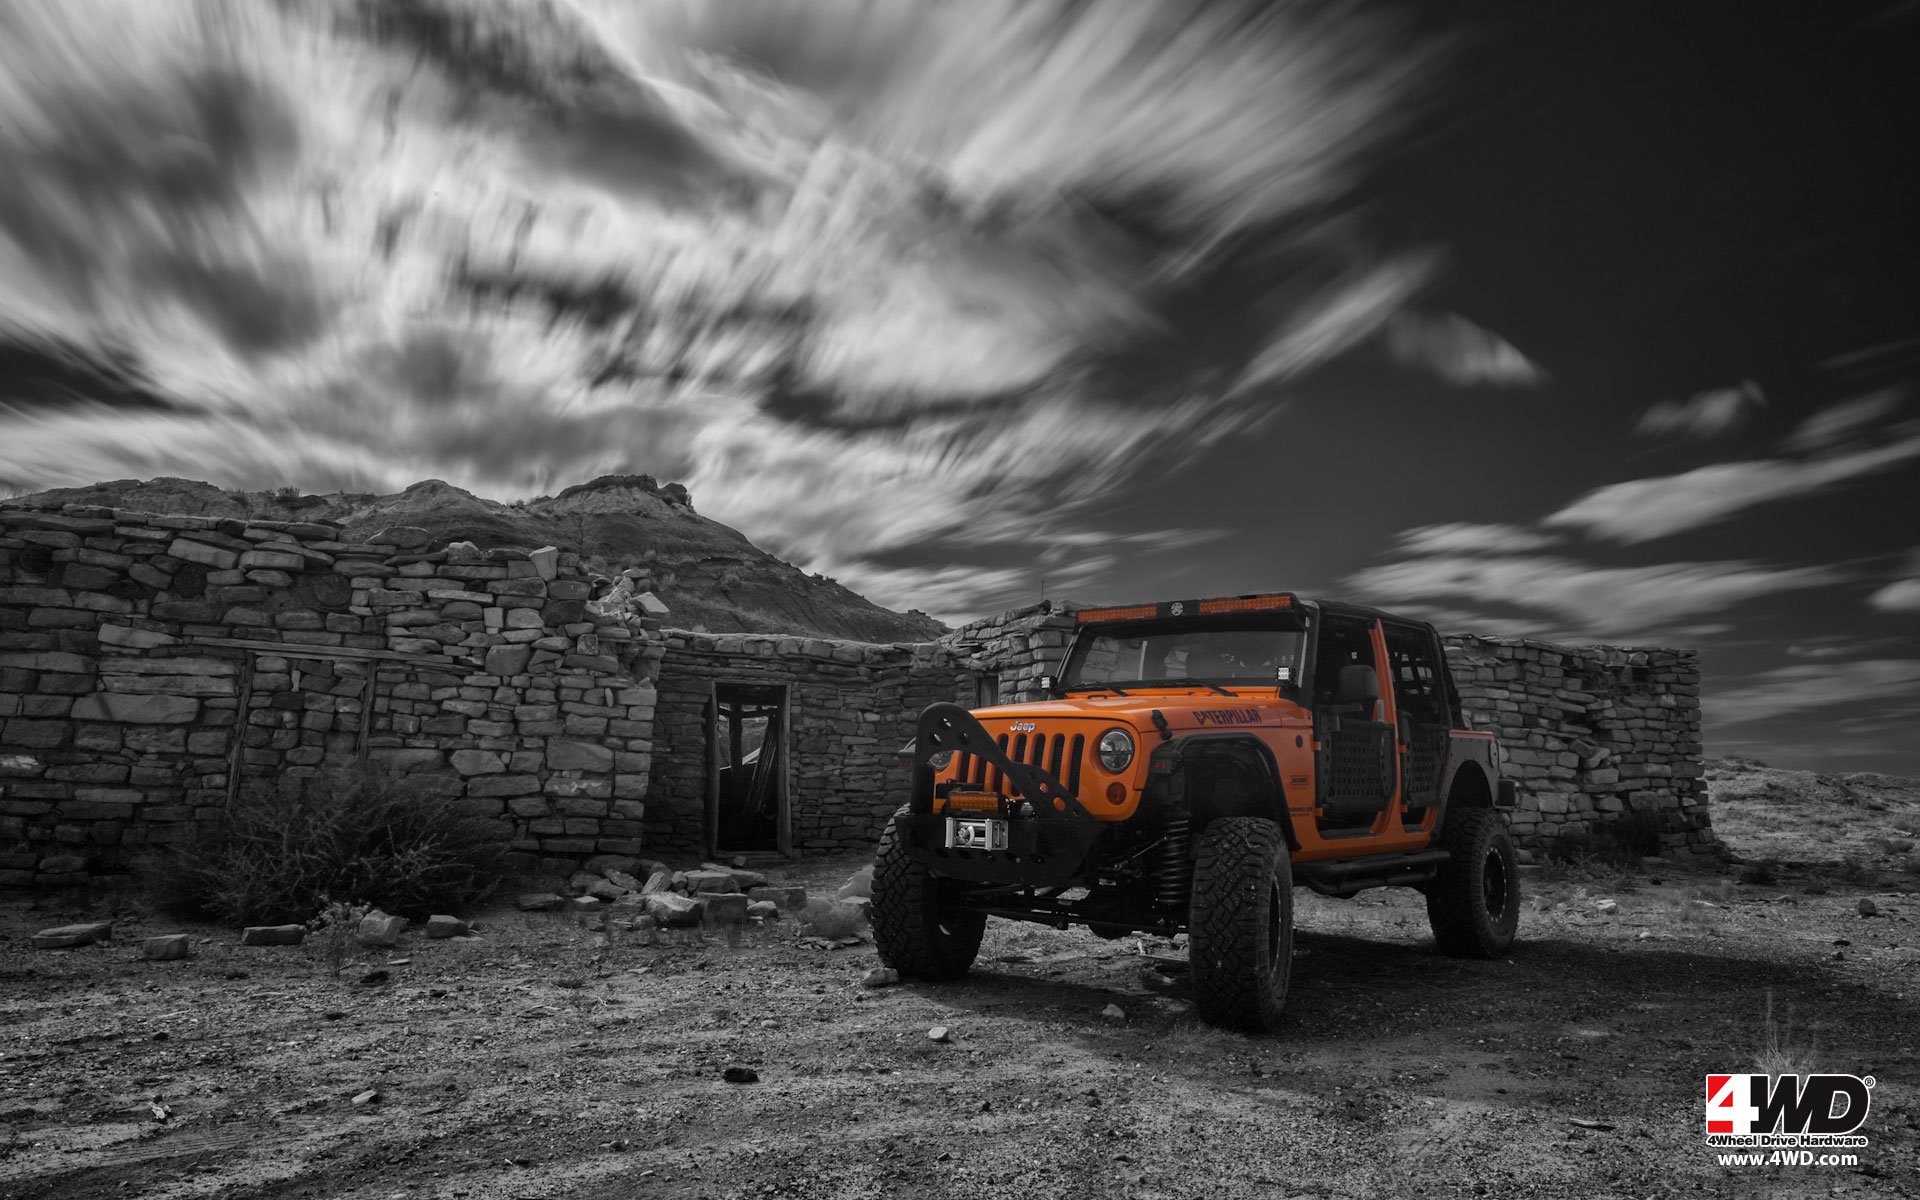 Jeep Wallpapers 4wd Com